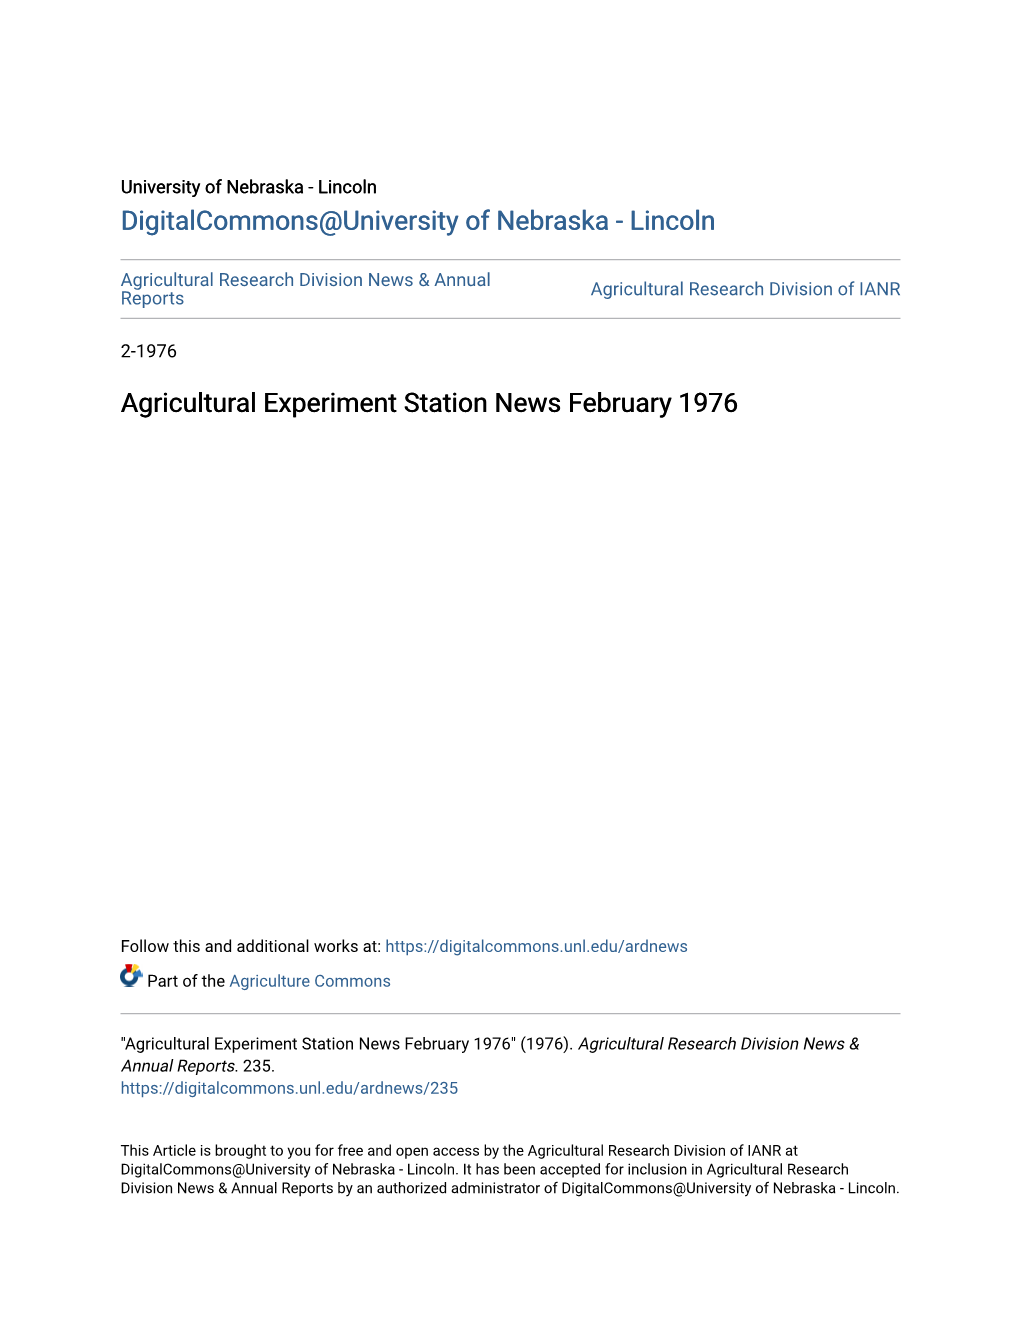 Agricultural Experiment Station News February 1976